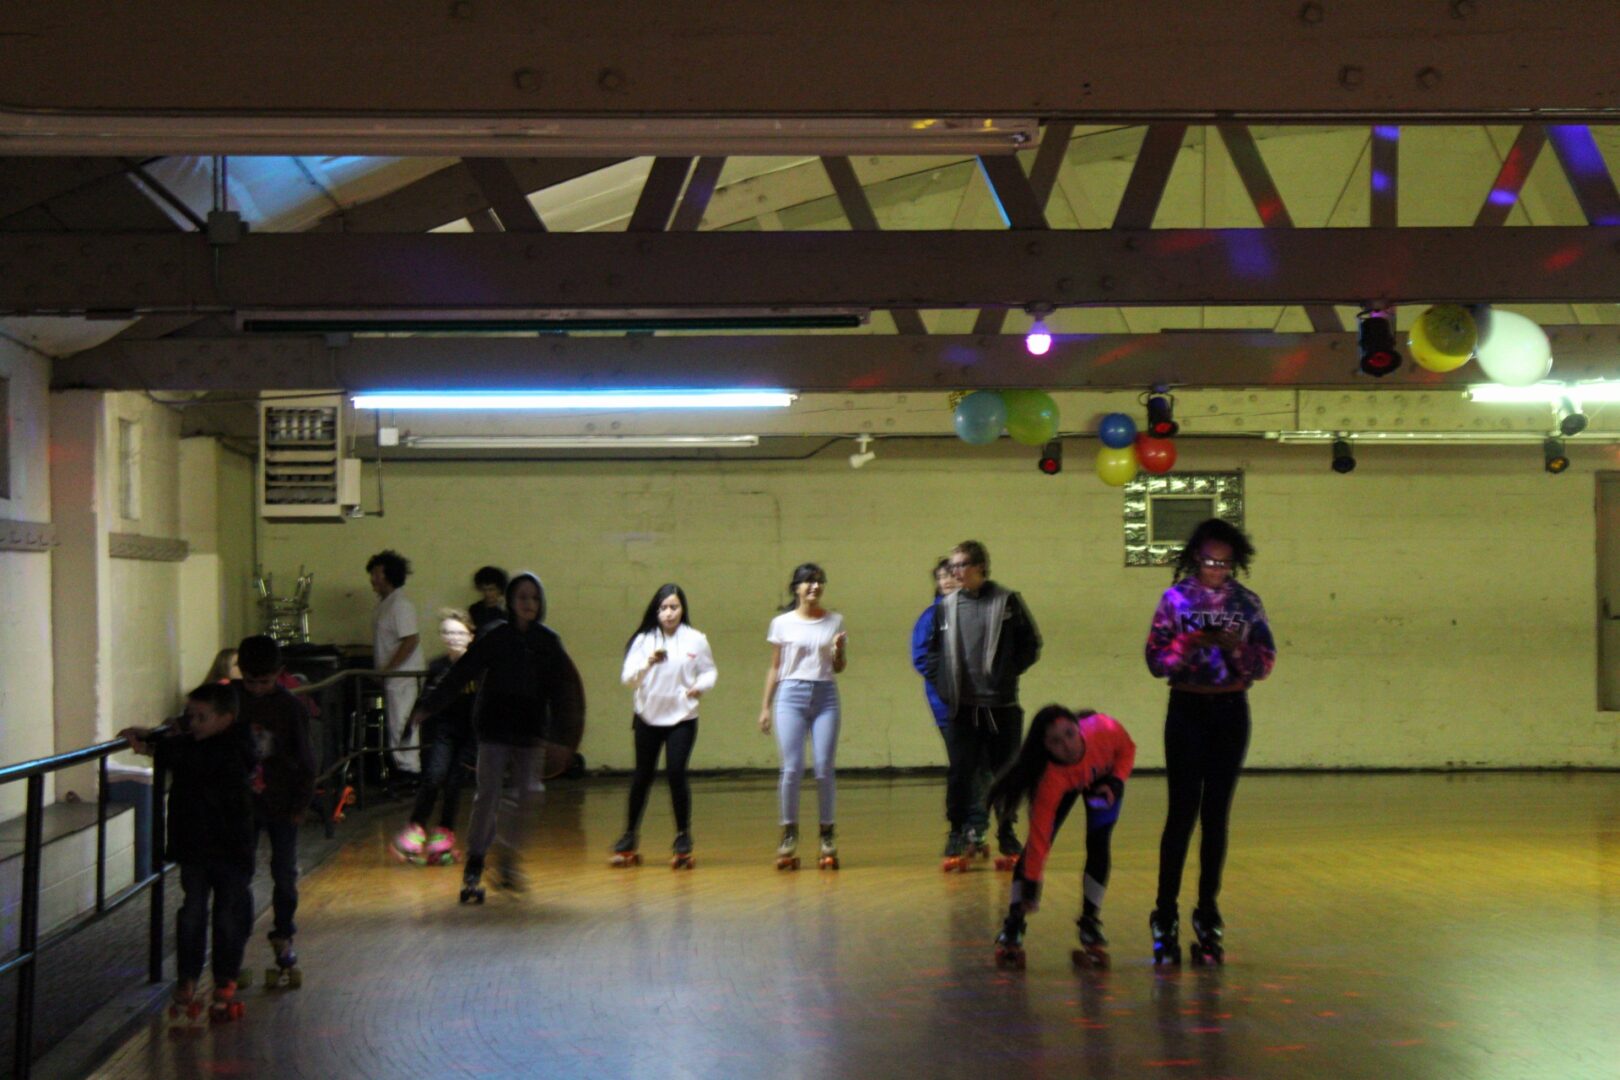 Teens and kids skating on our roller rink